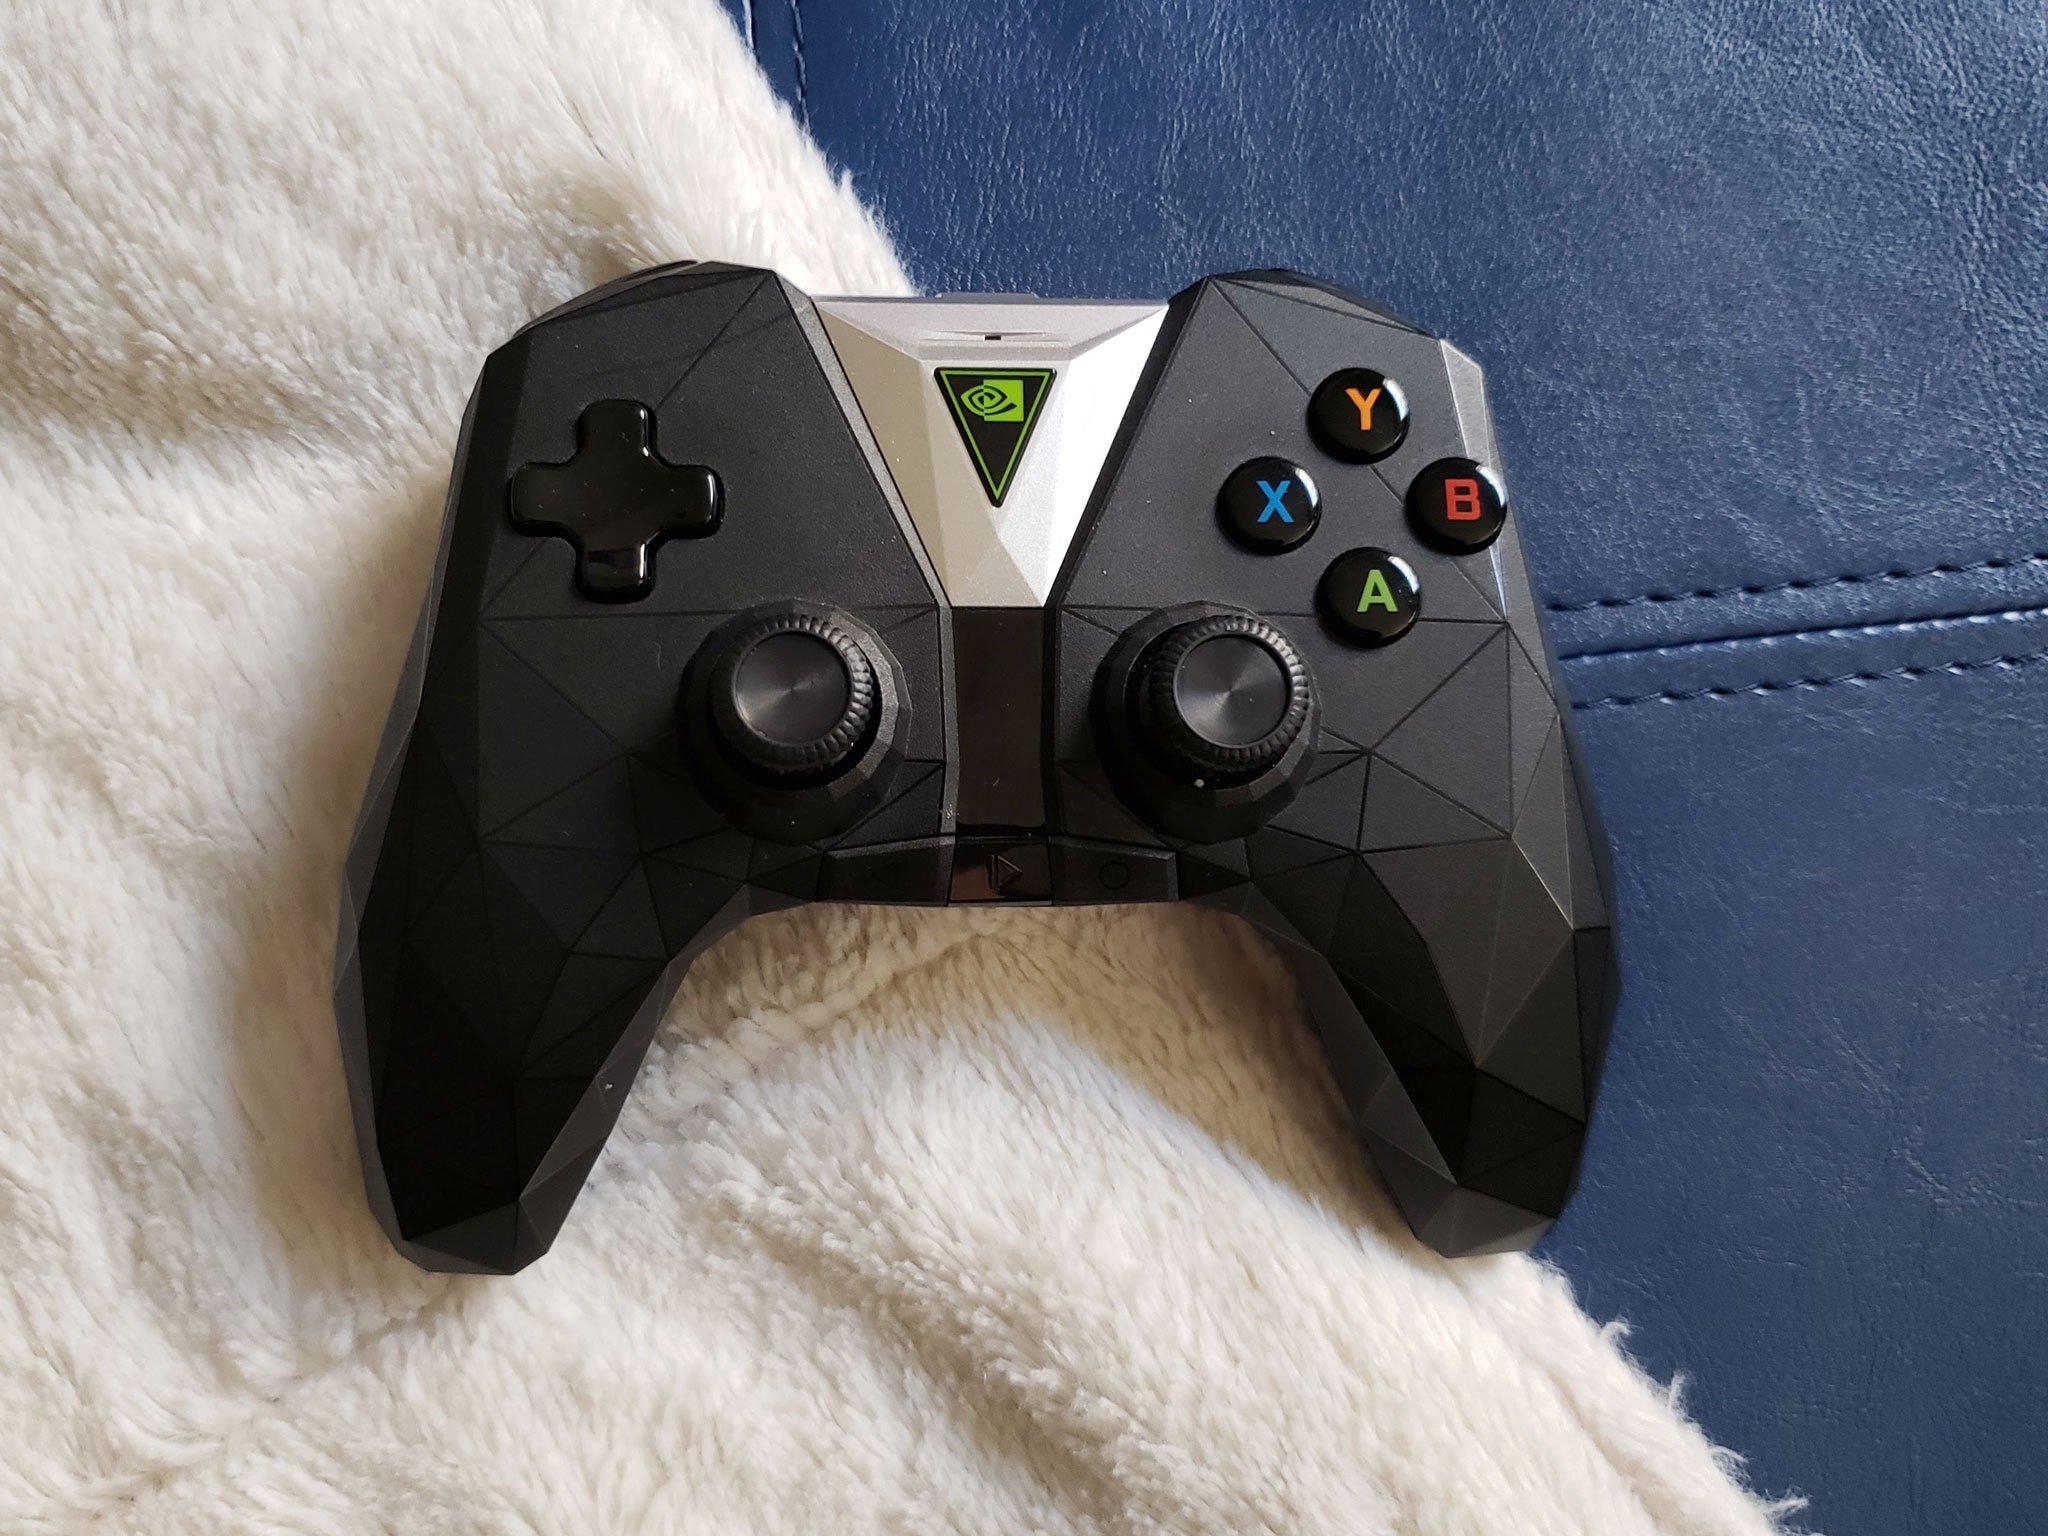 You've served me well, 2017 Shield Controller